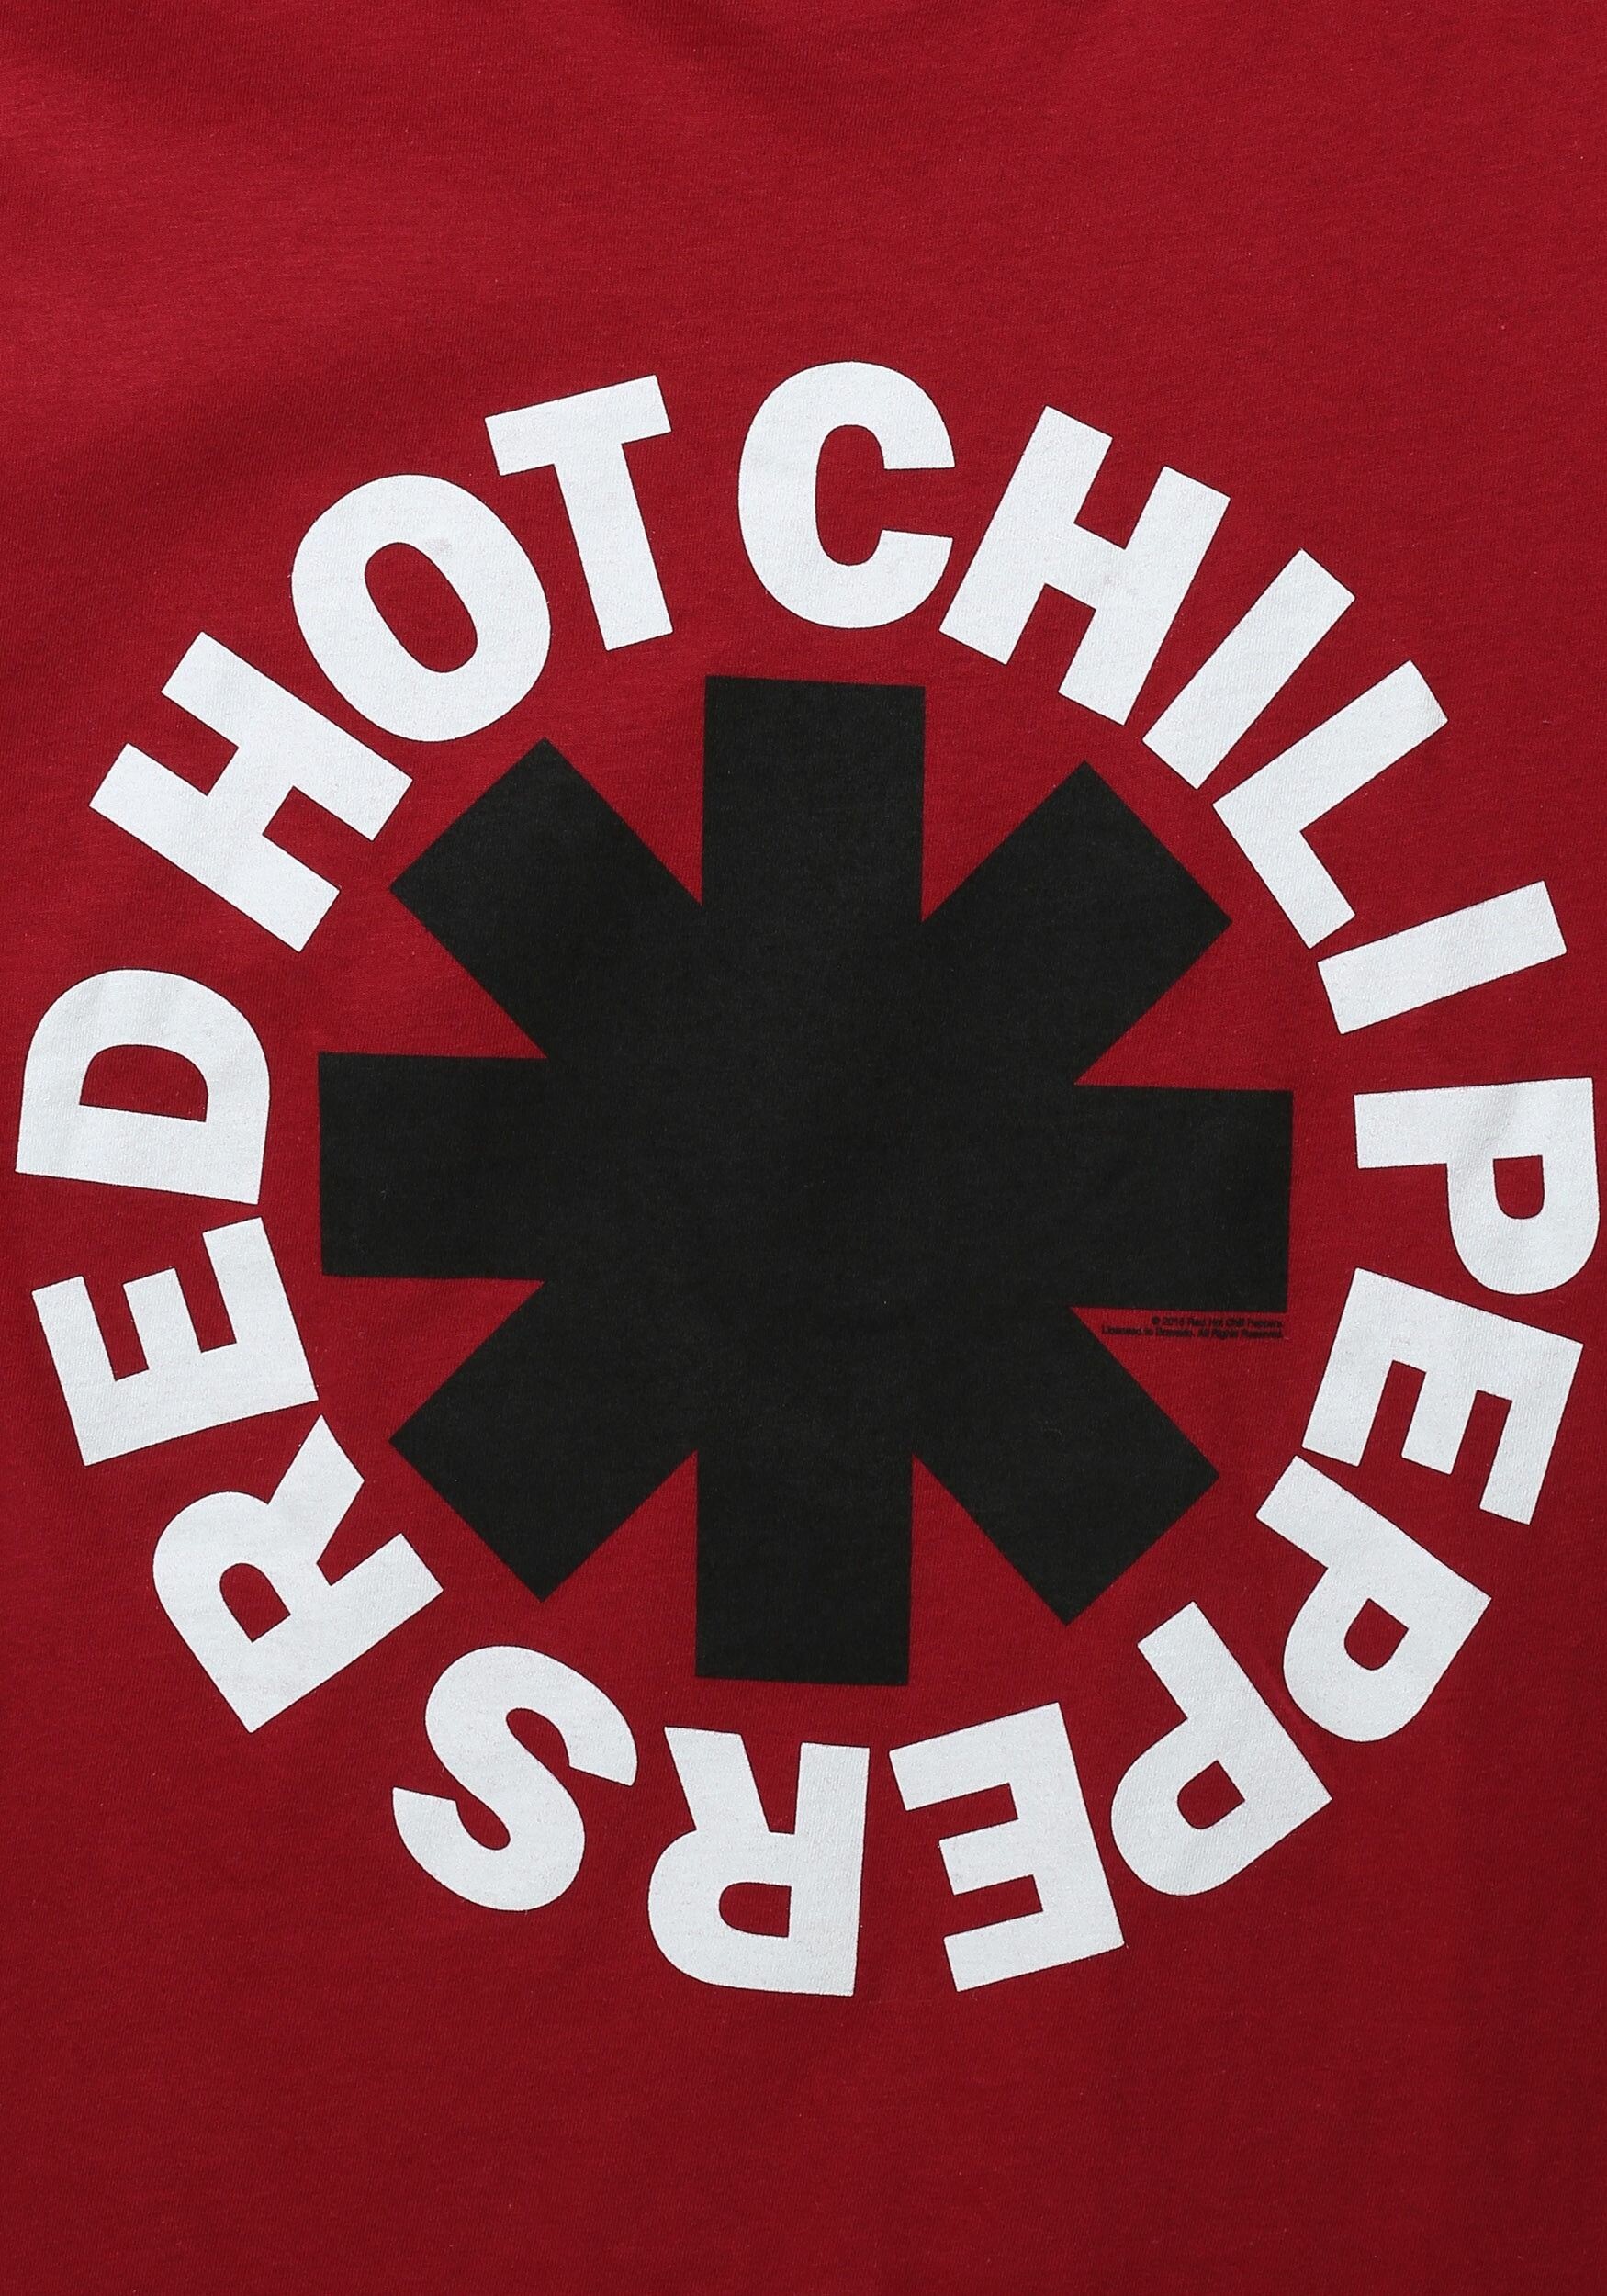 Red Hot Chilli Peppers: Winners of six Grammy Awards, Music band. 1750x2500 HD Wallpaper.